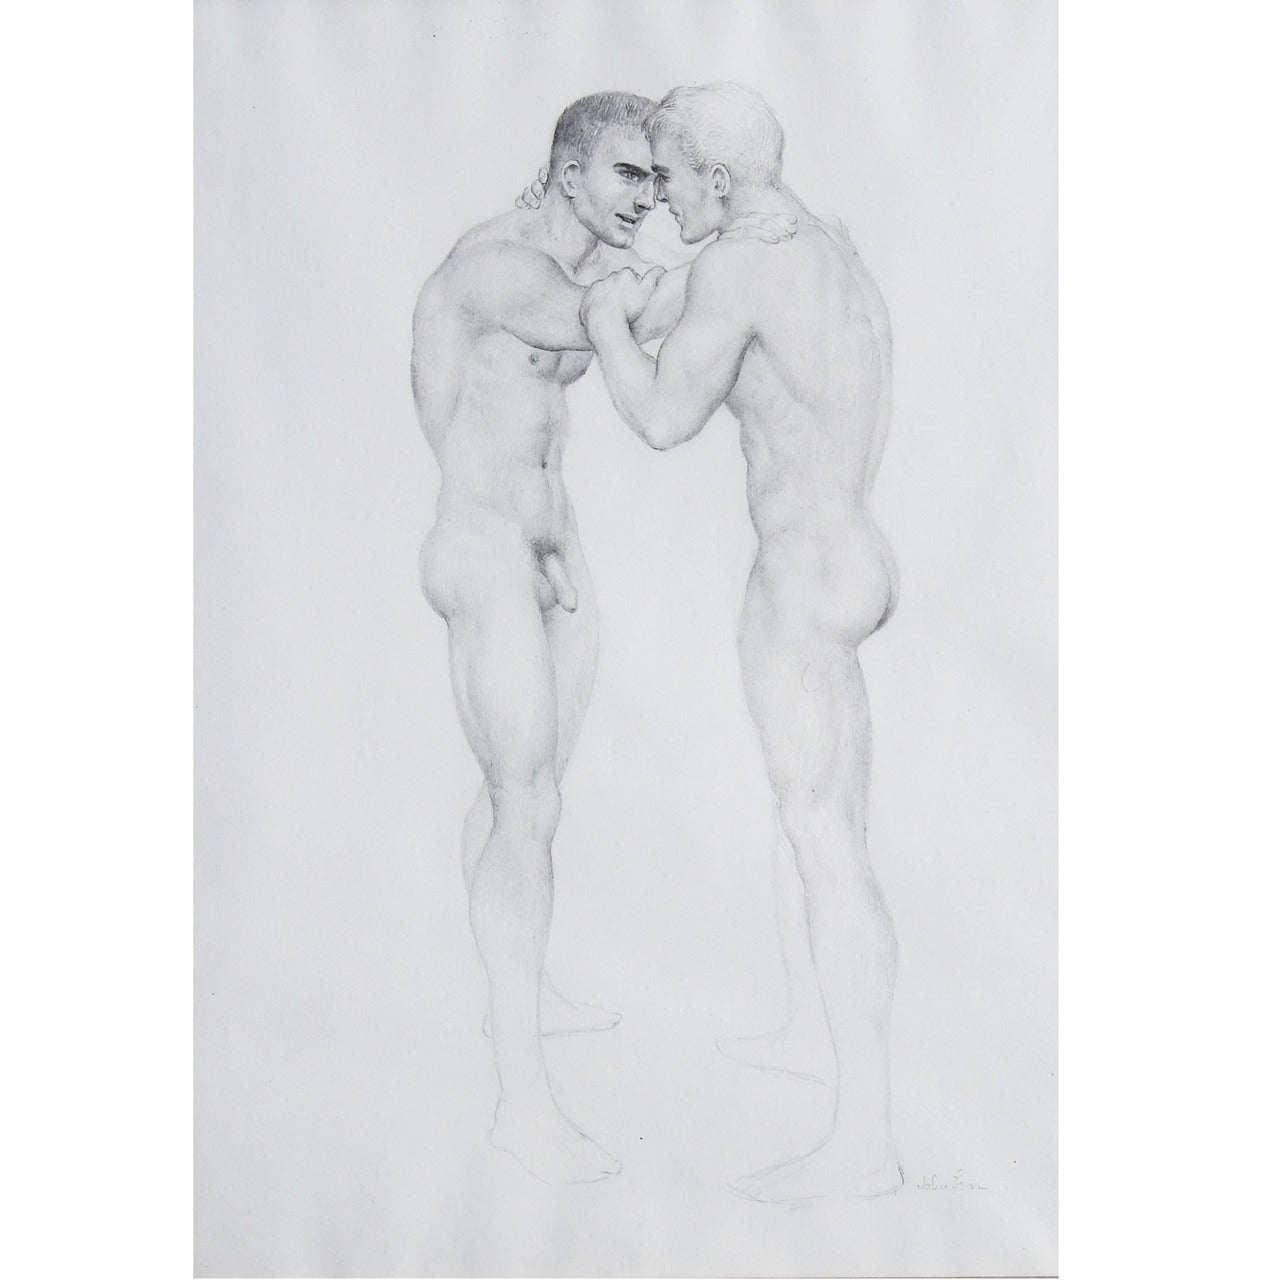 "Arm in Arm, " Unusual and Rare Drawing with Male Nudes by Lear